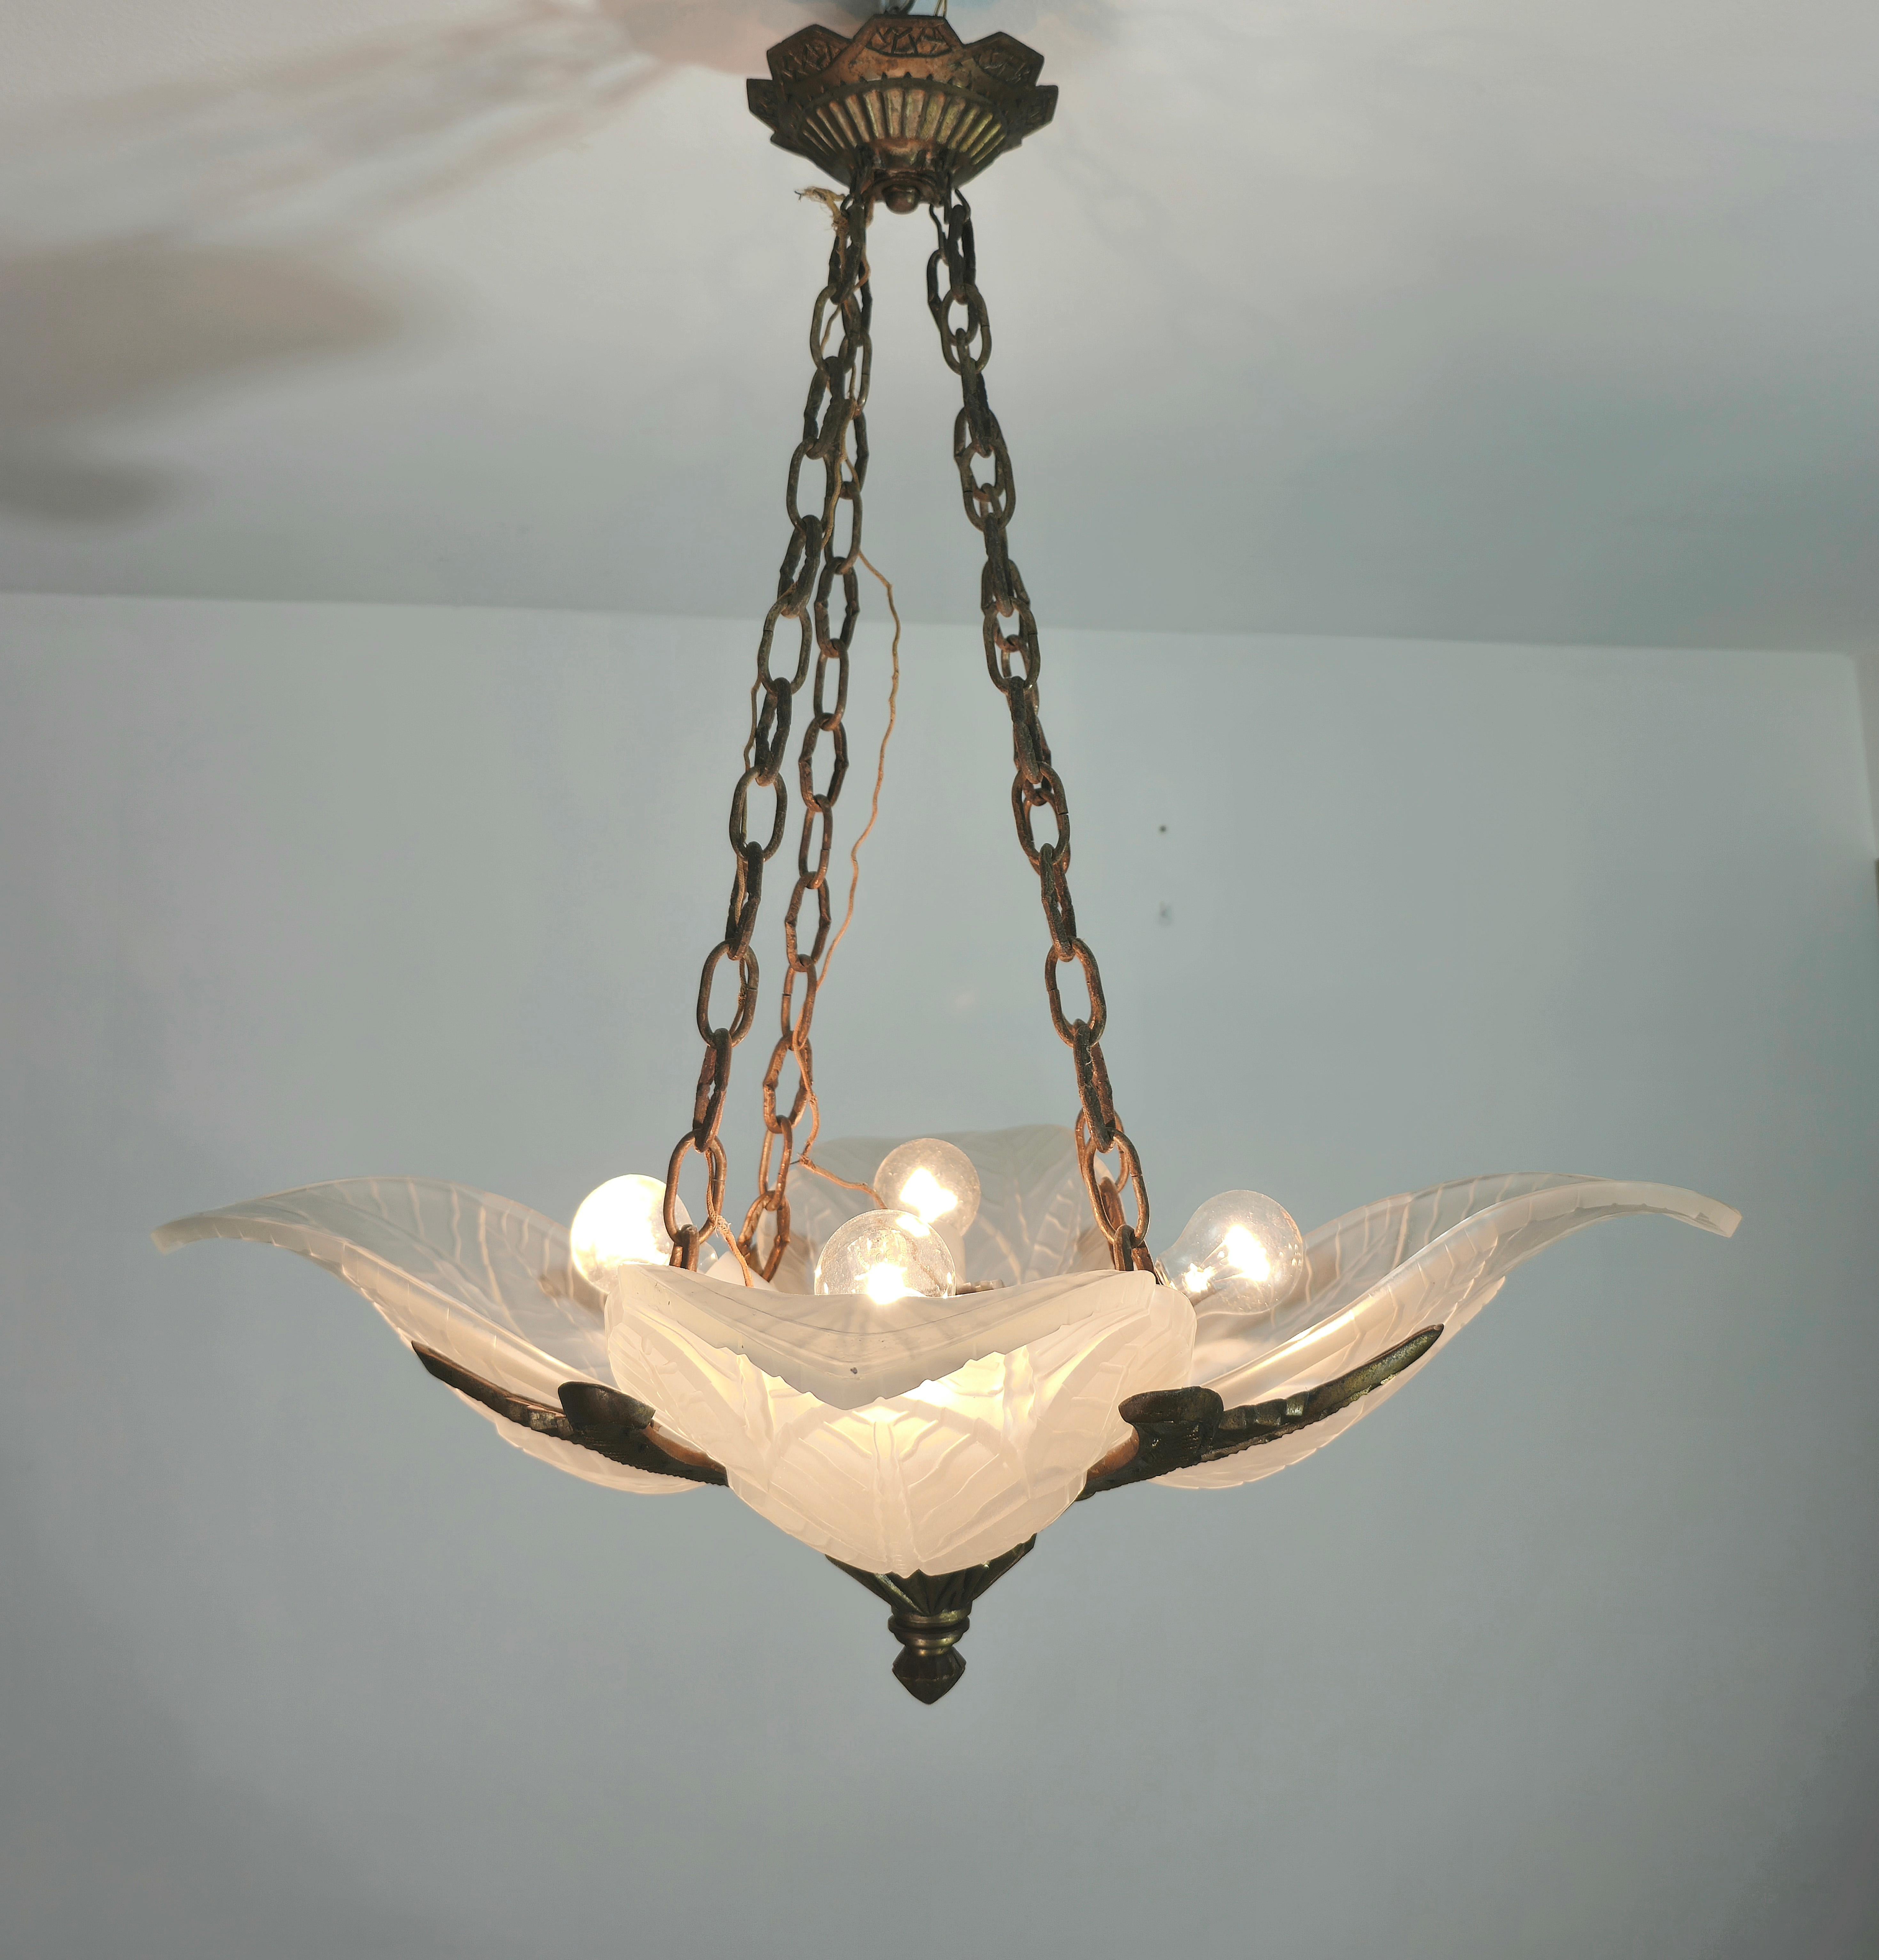 Chandelier Pendant Bronze Frosted Glass Art Deco French Design 1930s 1940s For Sale 8